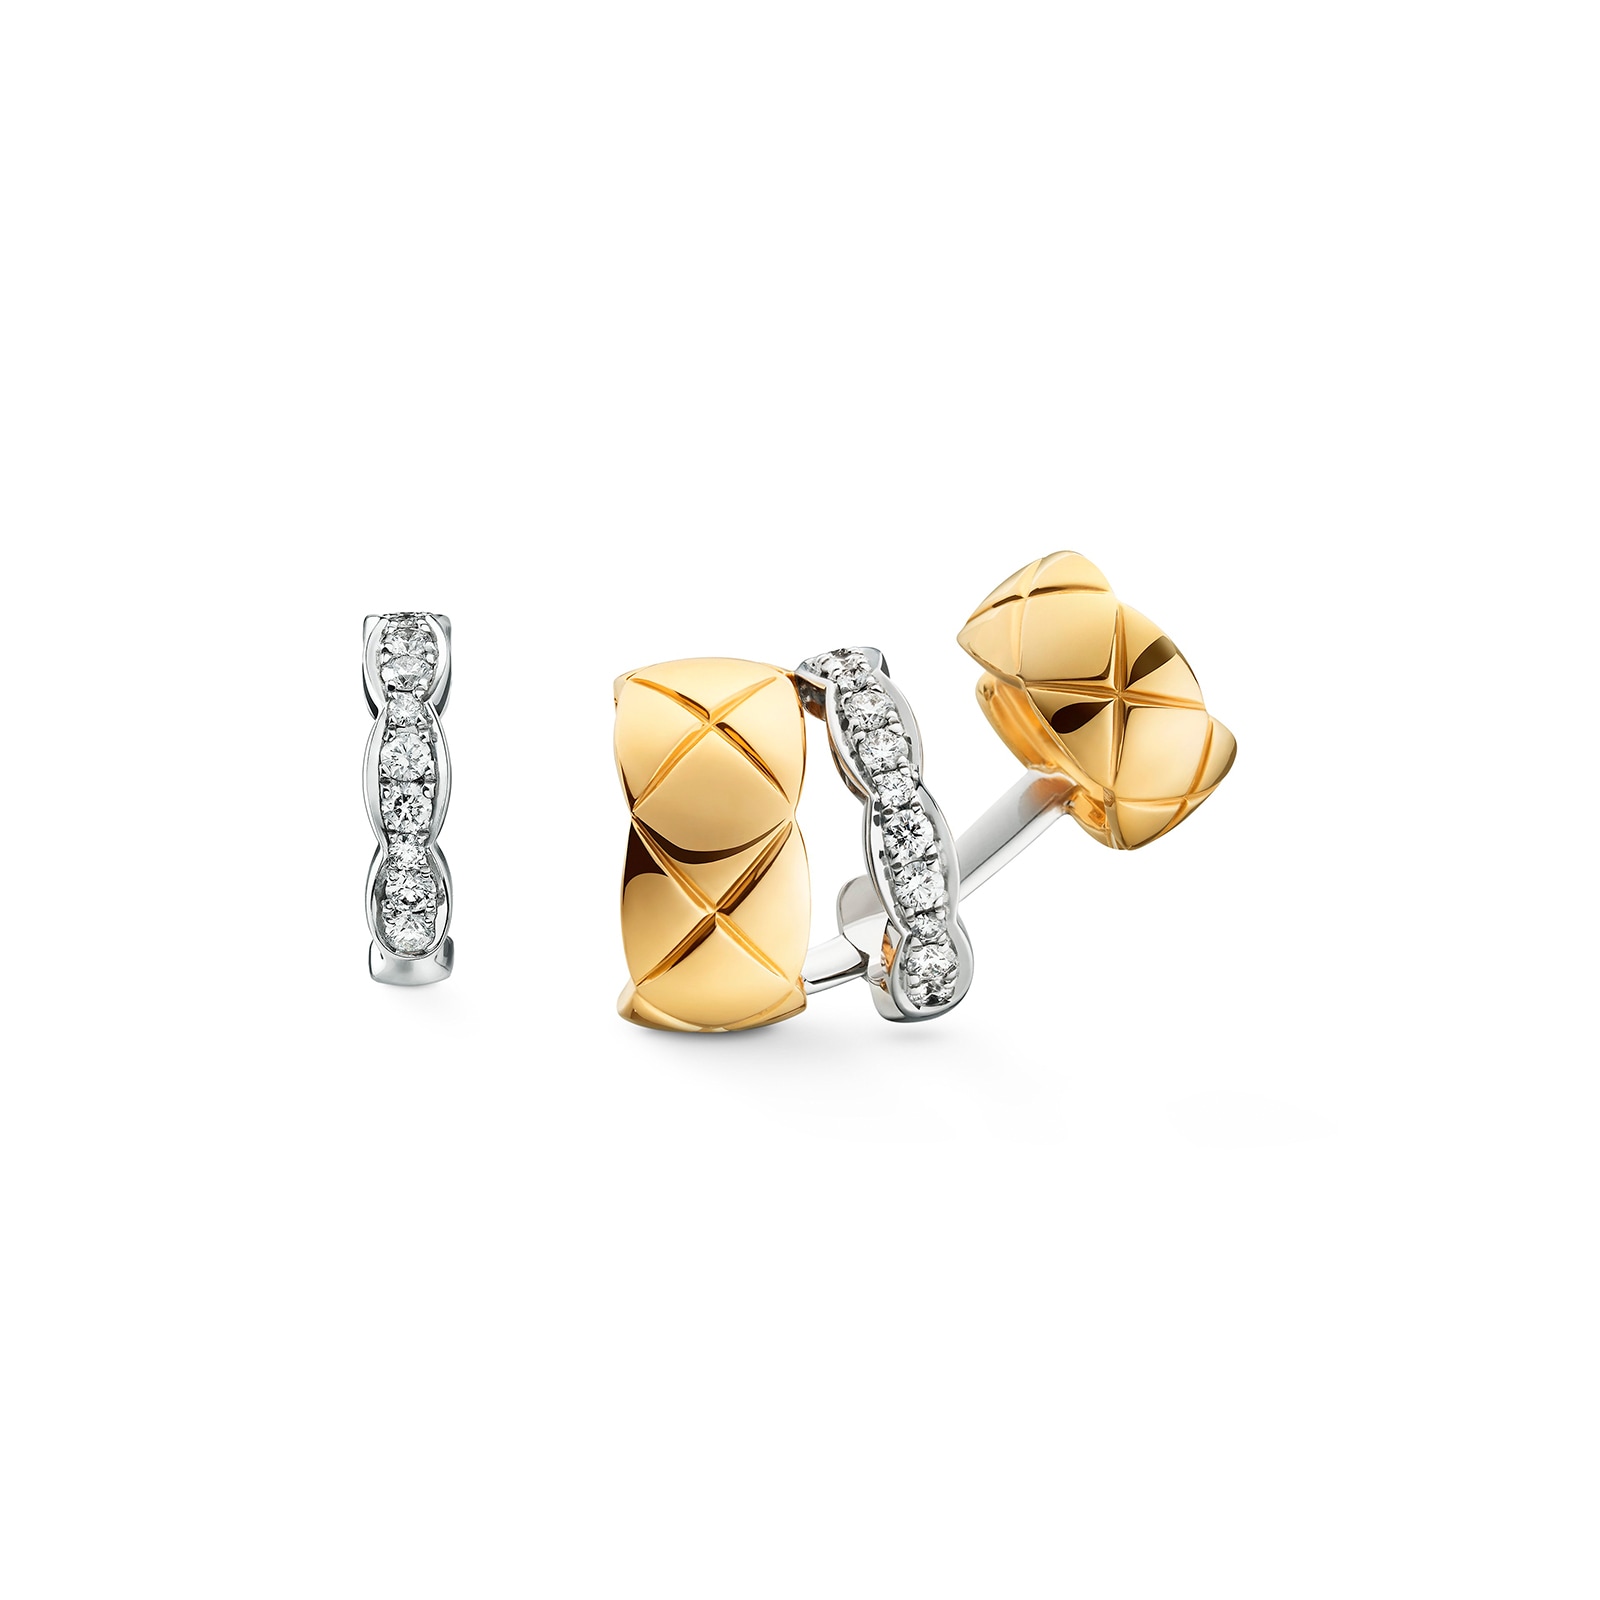 18k Yellow and White Gold 0.24cttw Diamond Coco Crush Earrings